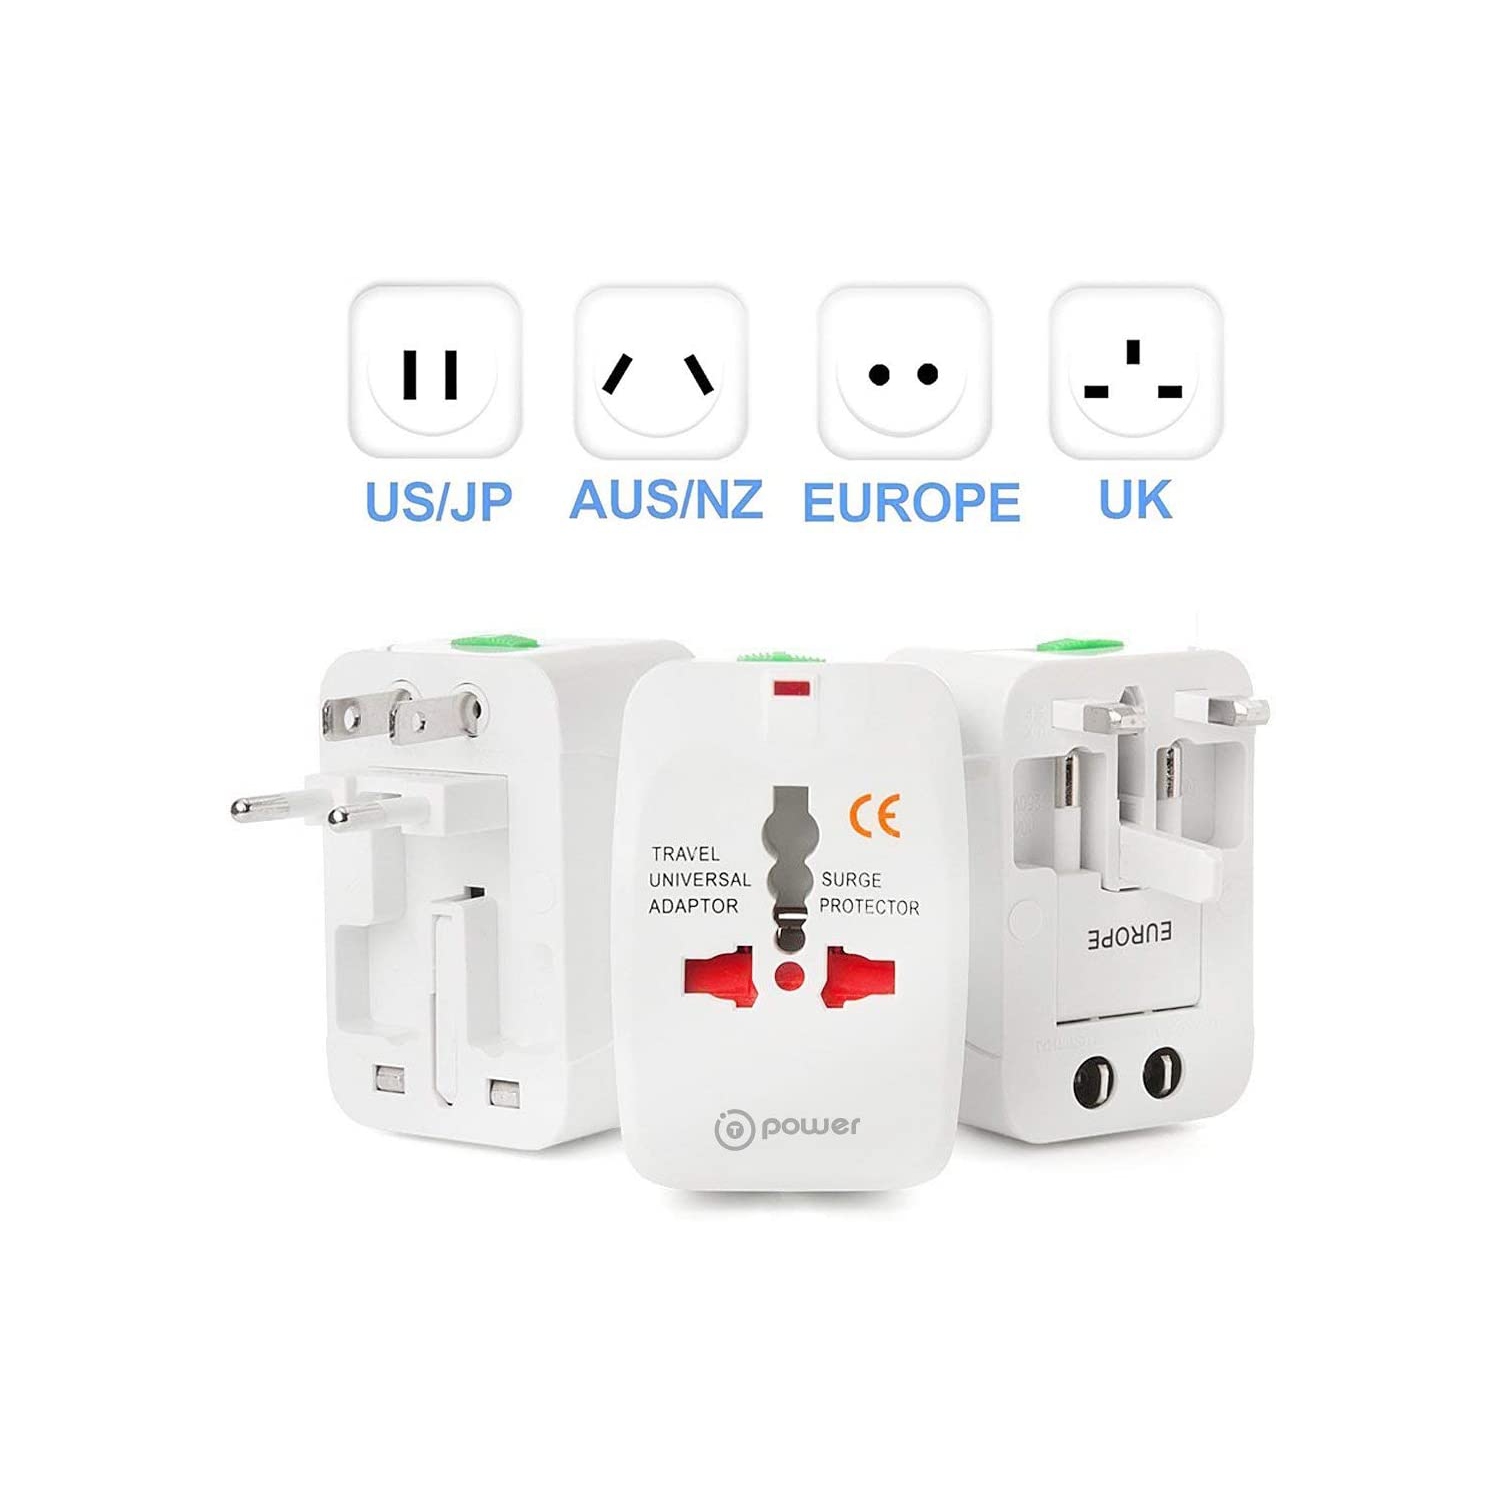 Universal Electrical Plug AdapterTravel Adapter Compatible Works for 150+ Countries 110~220 Volt Worldwide use at UK Japan China EU US EU UK AUS Europe All in One Universal Travel Adapter Charger Plug